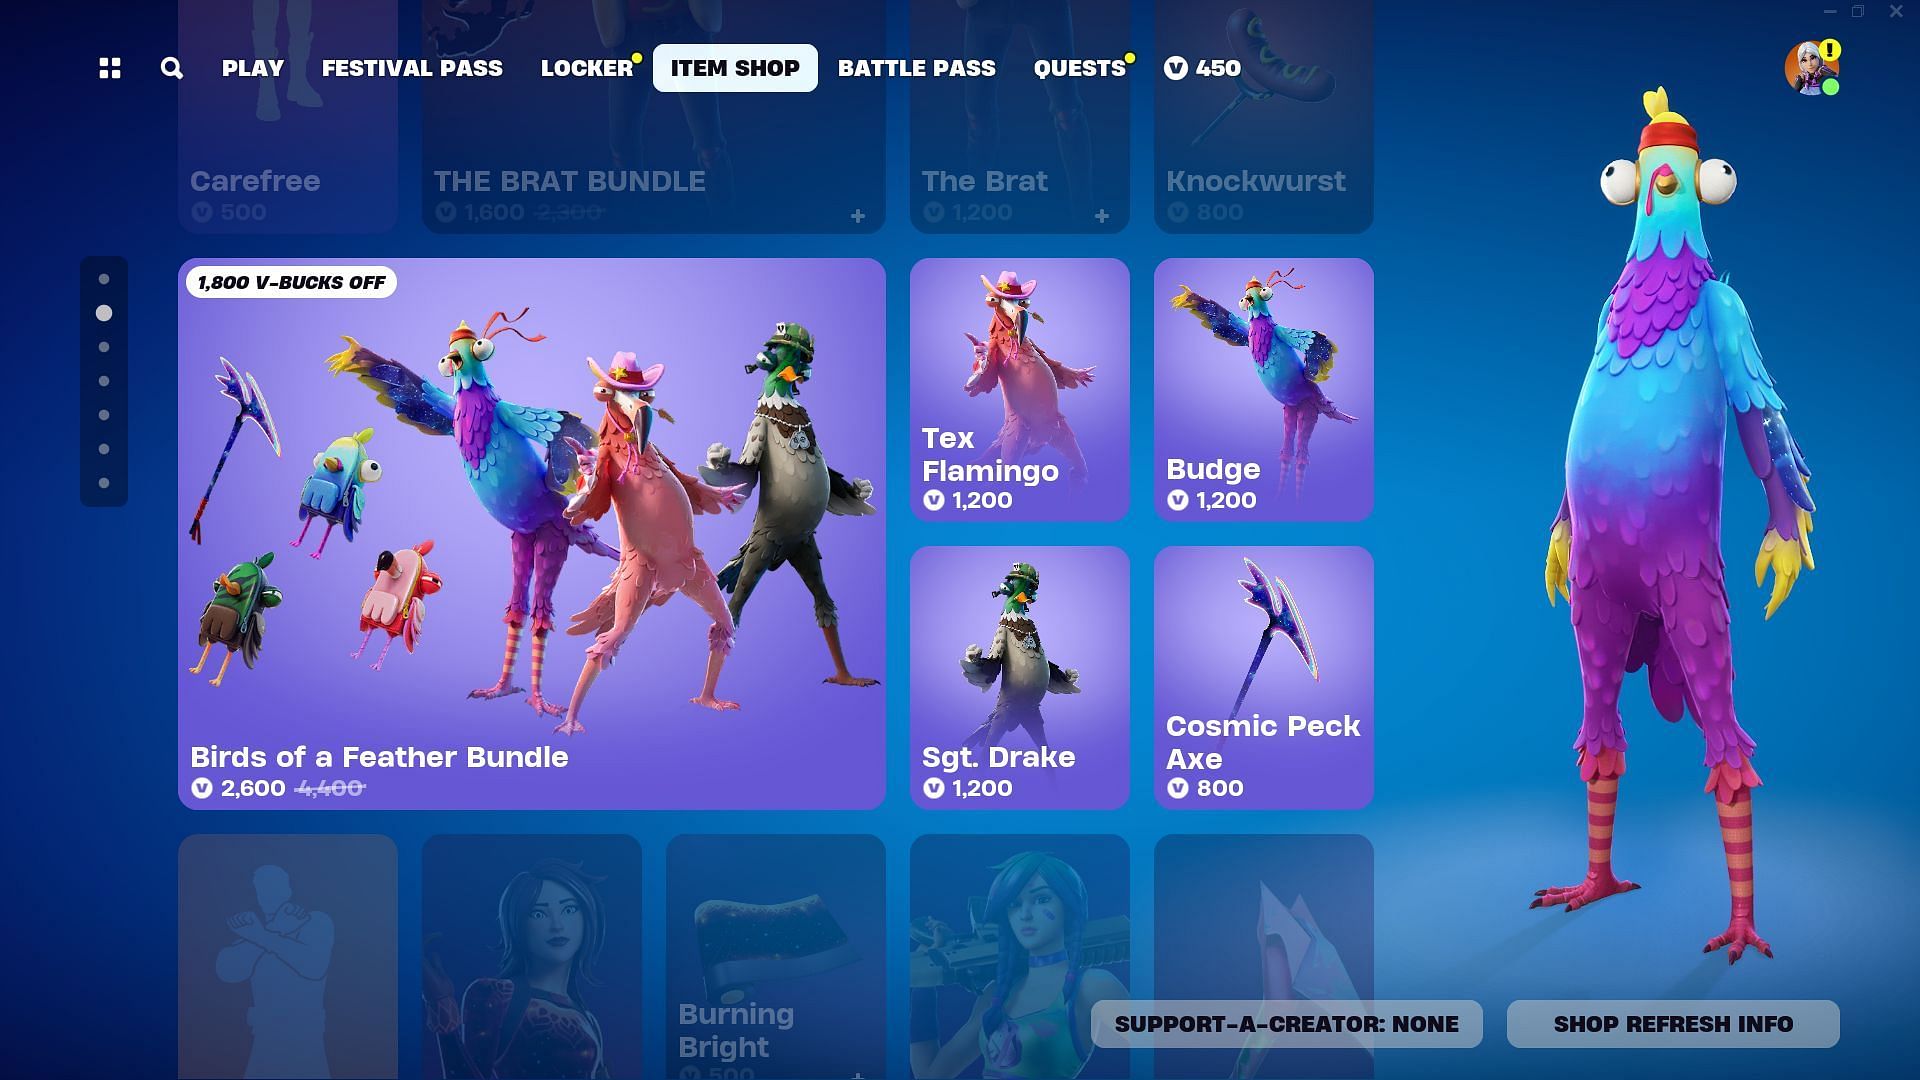 Birds of a Feather Bundle is listed in the Item Shop (Image via Epic Games)